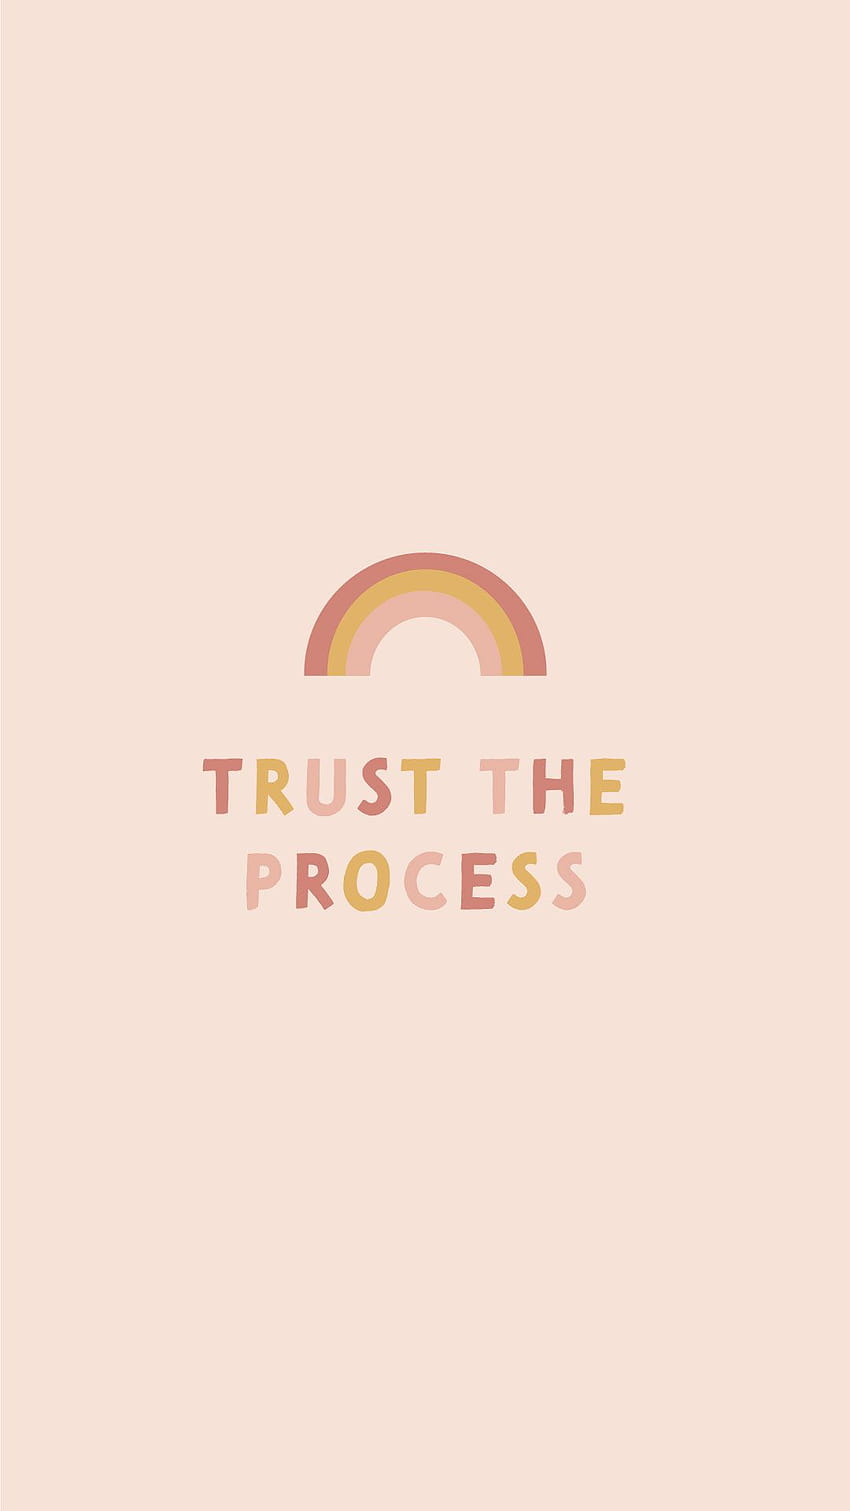 Mobile backgrounds inspirational quote, trust the process HD phone wallpaper